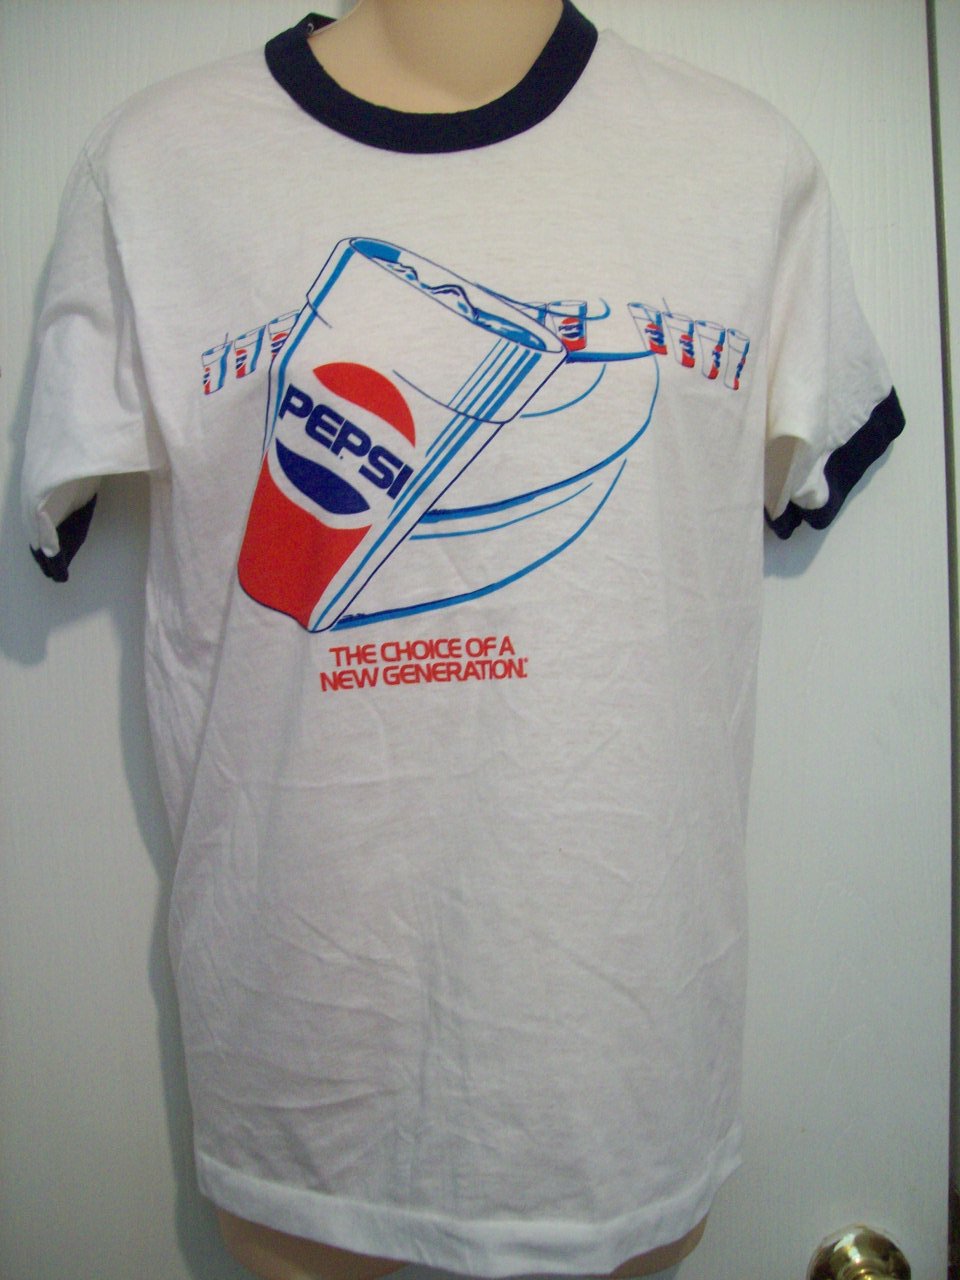 Vtg Style Pepsi The Choice New Generation Blue White Red Ss Ringer T Tee Shirt By Screen Stars S